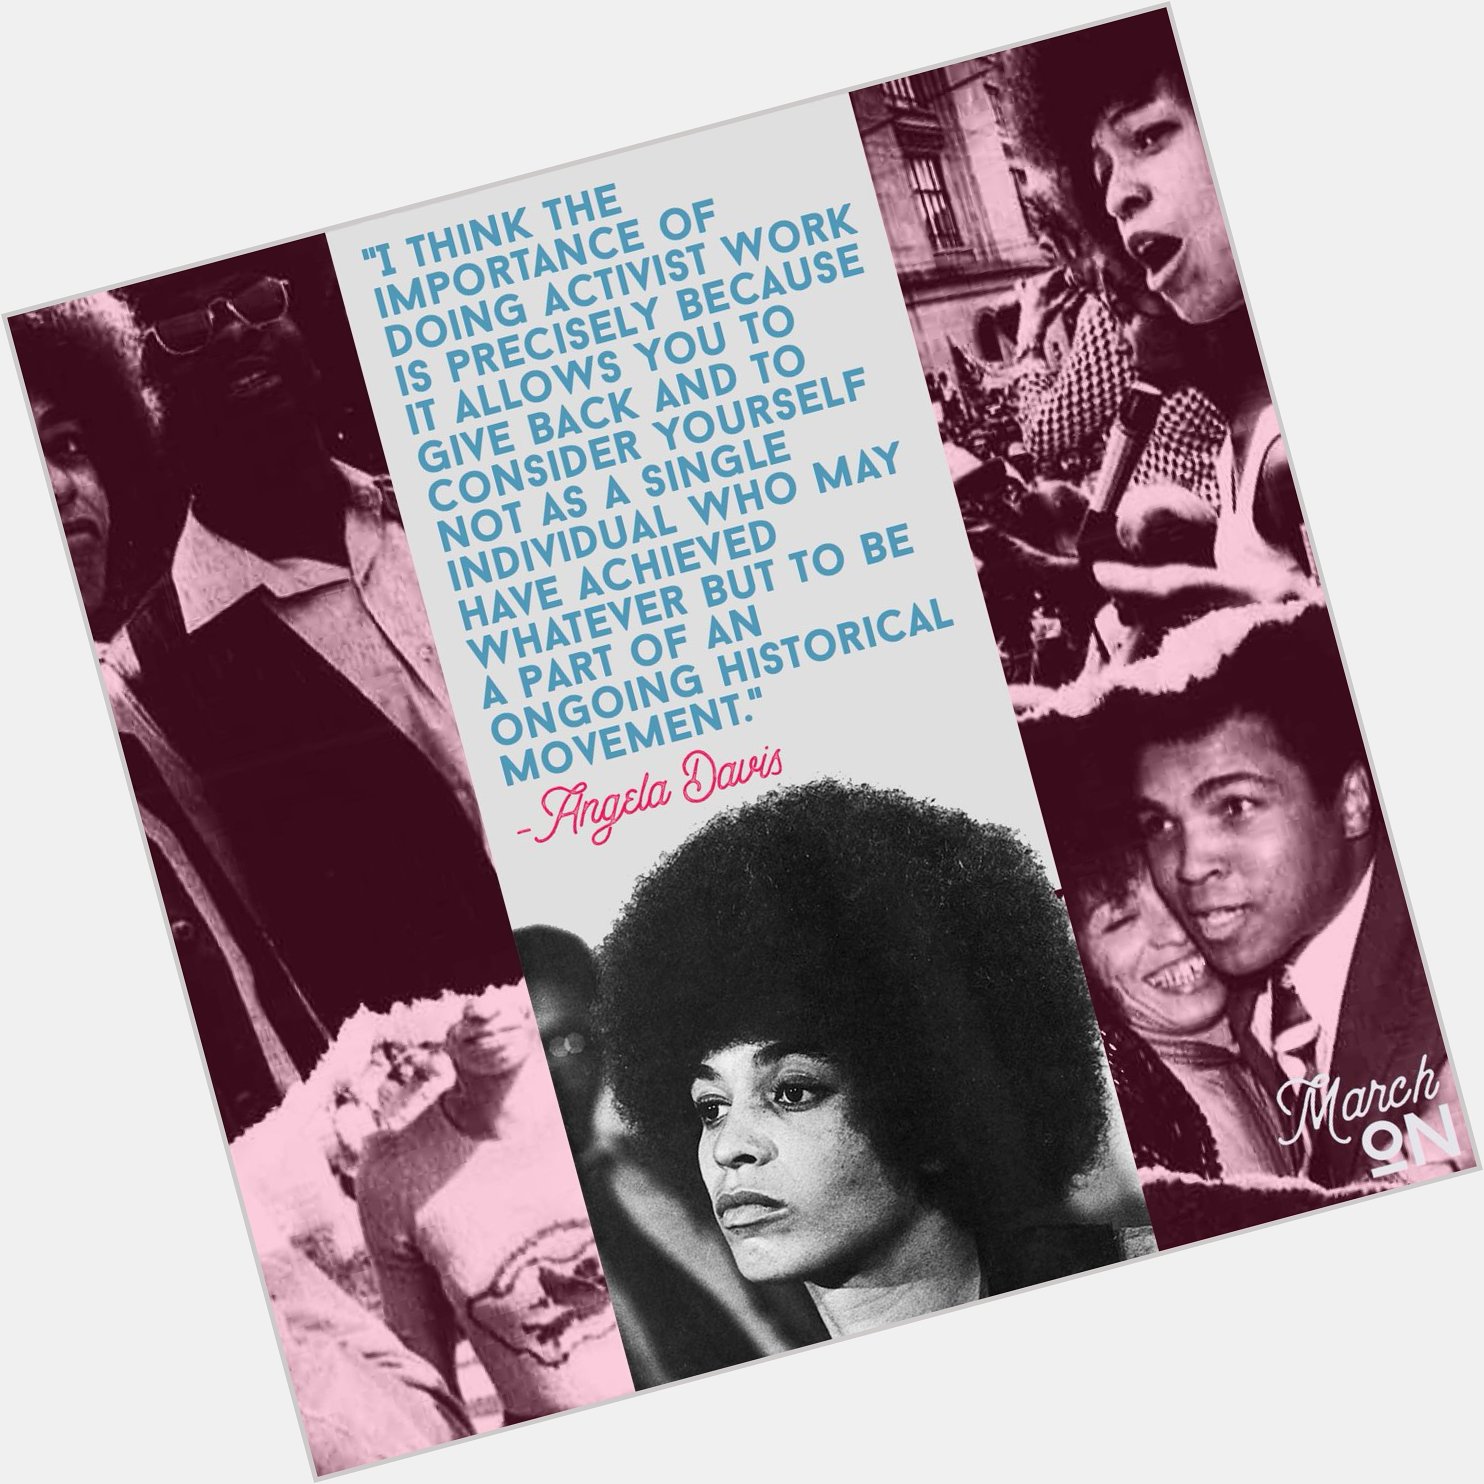 Happy birthday Angela Davis! Your activism continues to blaze trails and inspires all the work that we do! 